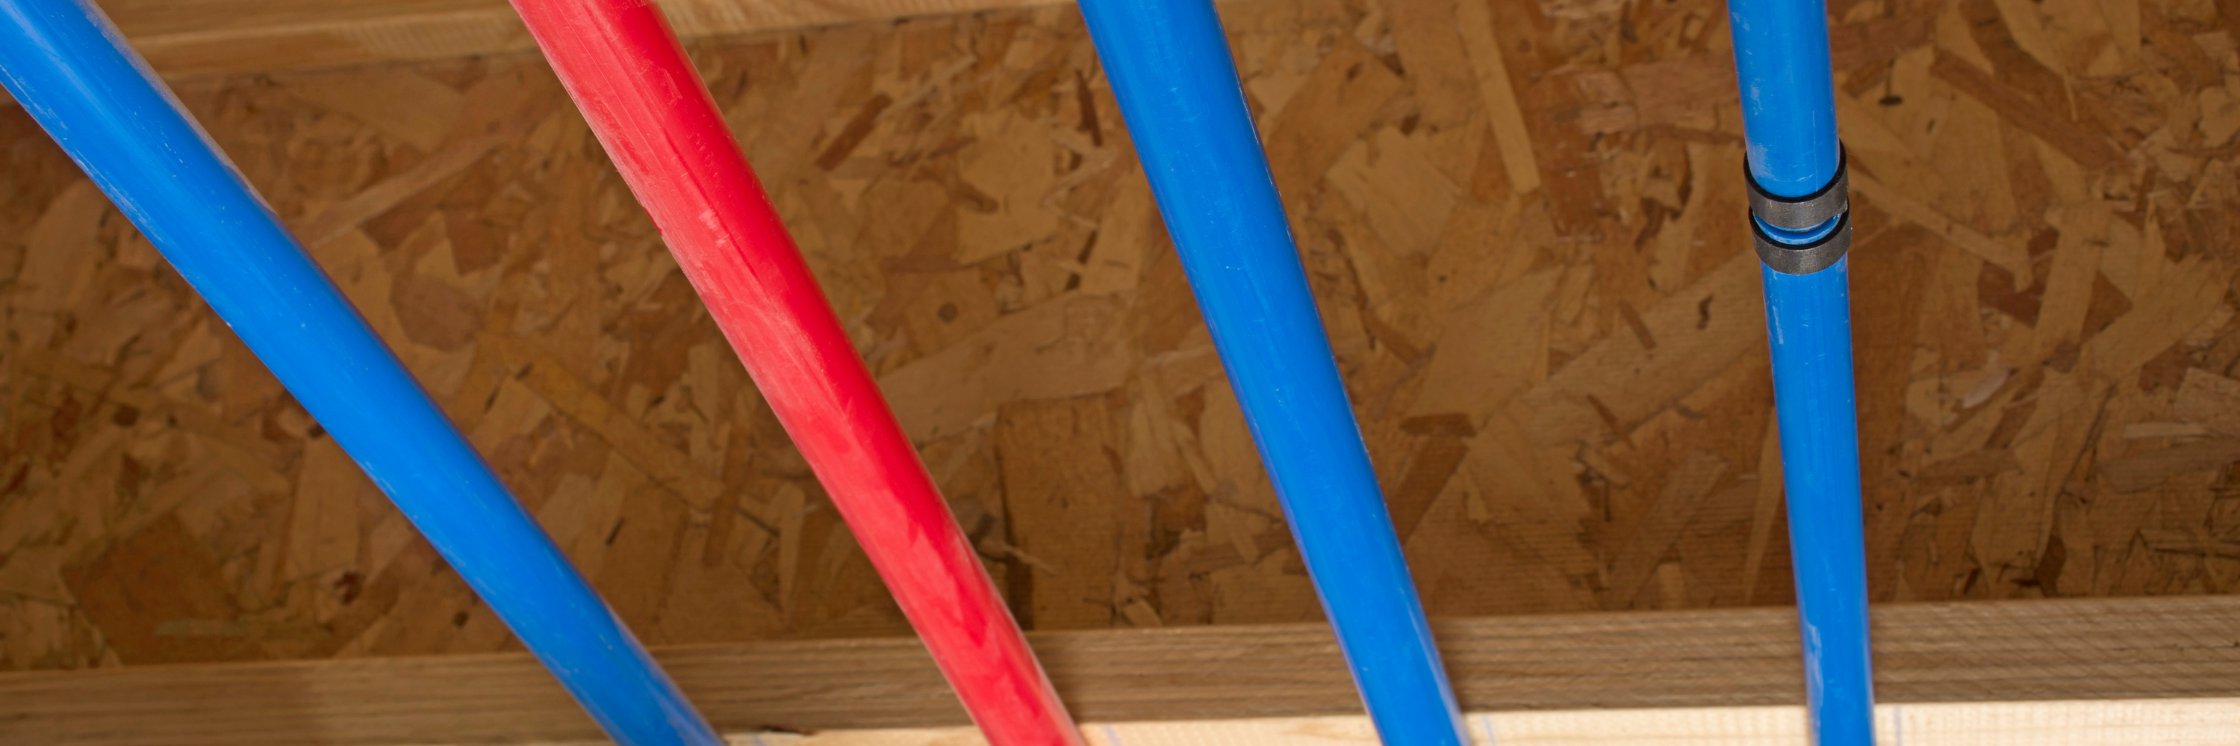 Pros and Cons of PEX Pipes: The Versatile Plastic for Plumbing